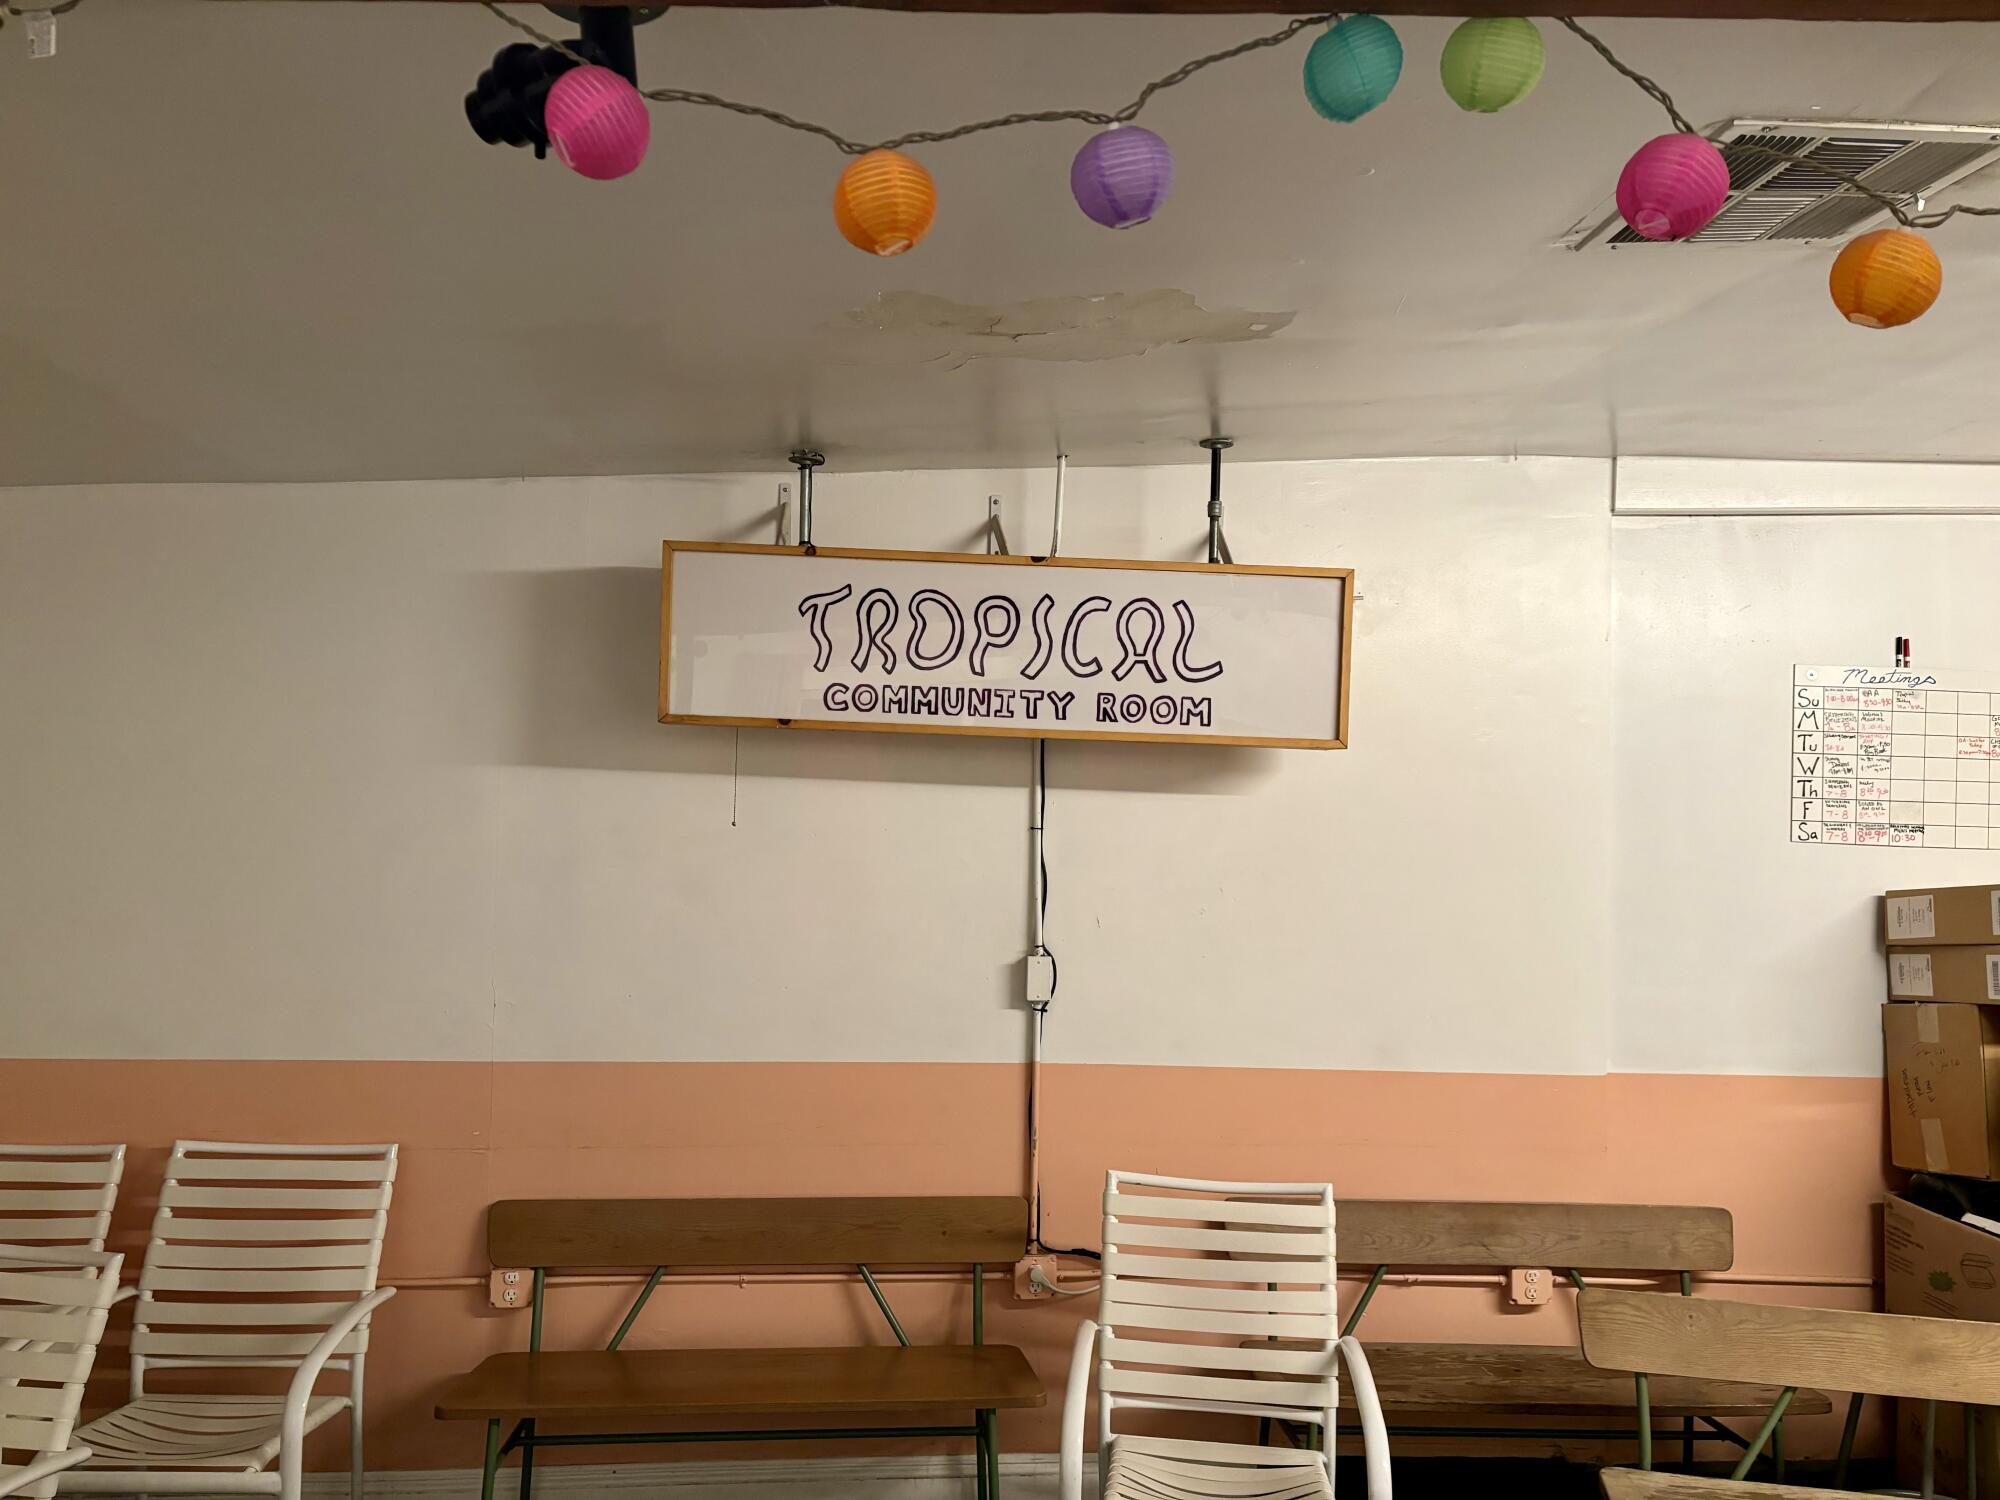 For the last few years at Café Tropical, meetings were held here throughout the week for members of the recovery community.